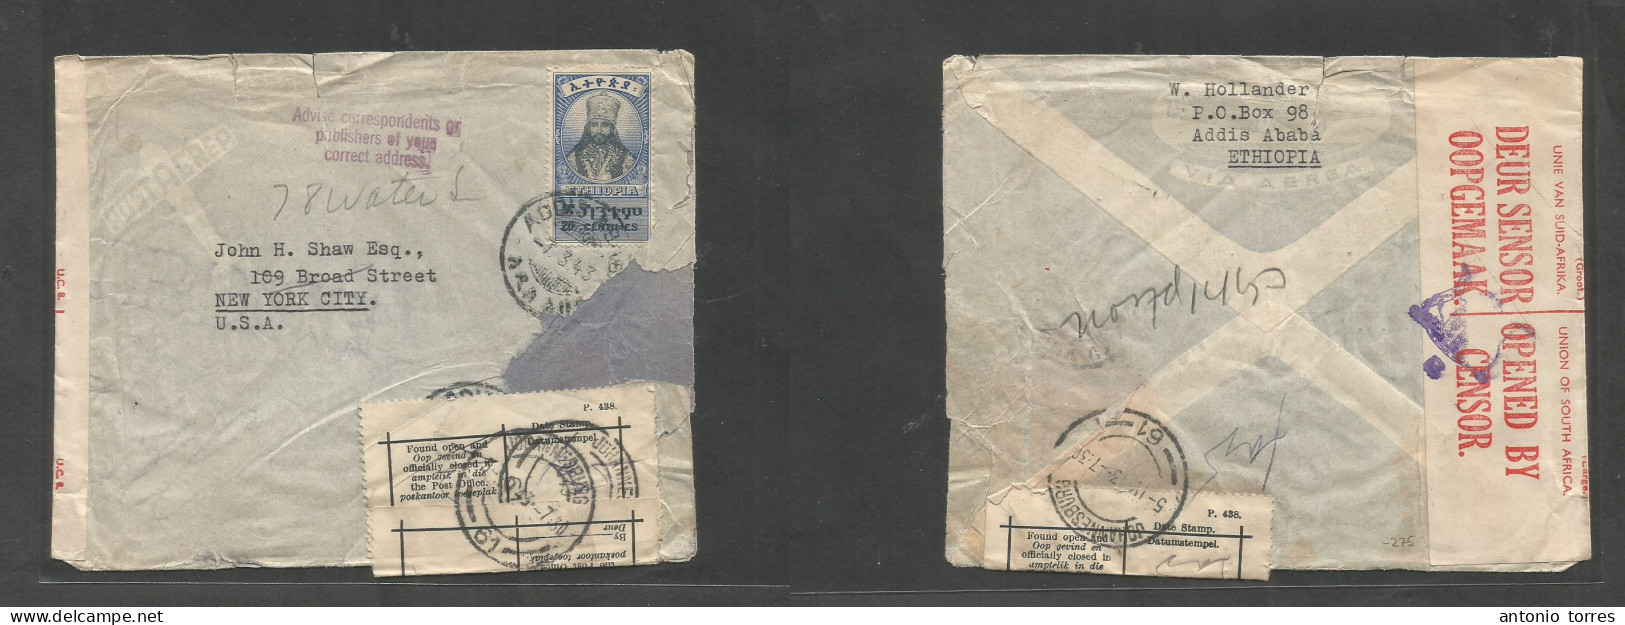 Ethiopia. 1943 (7 March) Addis Abeba - USA, NYC. Fkd Env 20c Rate + S. Africa Censor + Post Office Official Label Tied A - Ethiopia